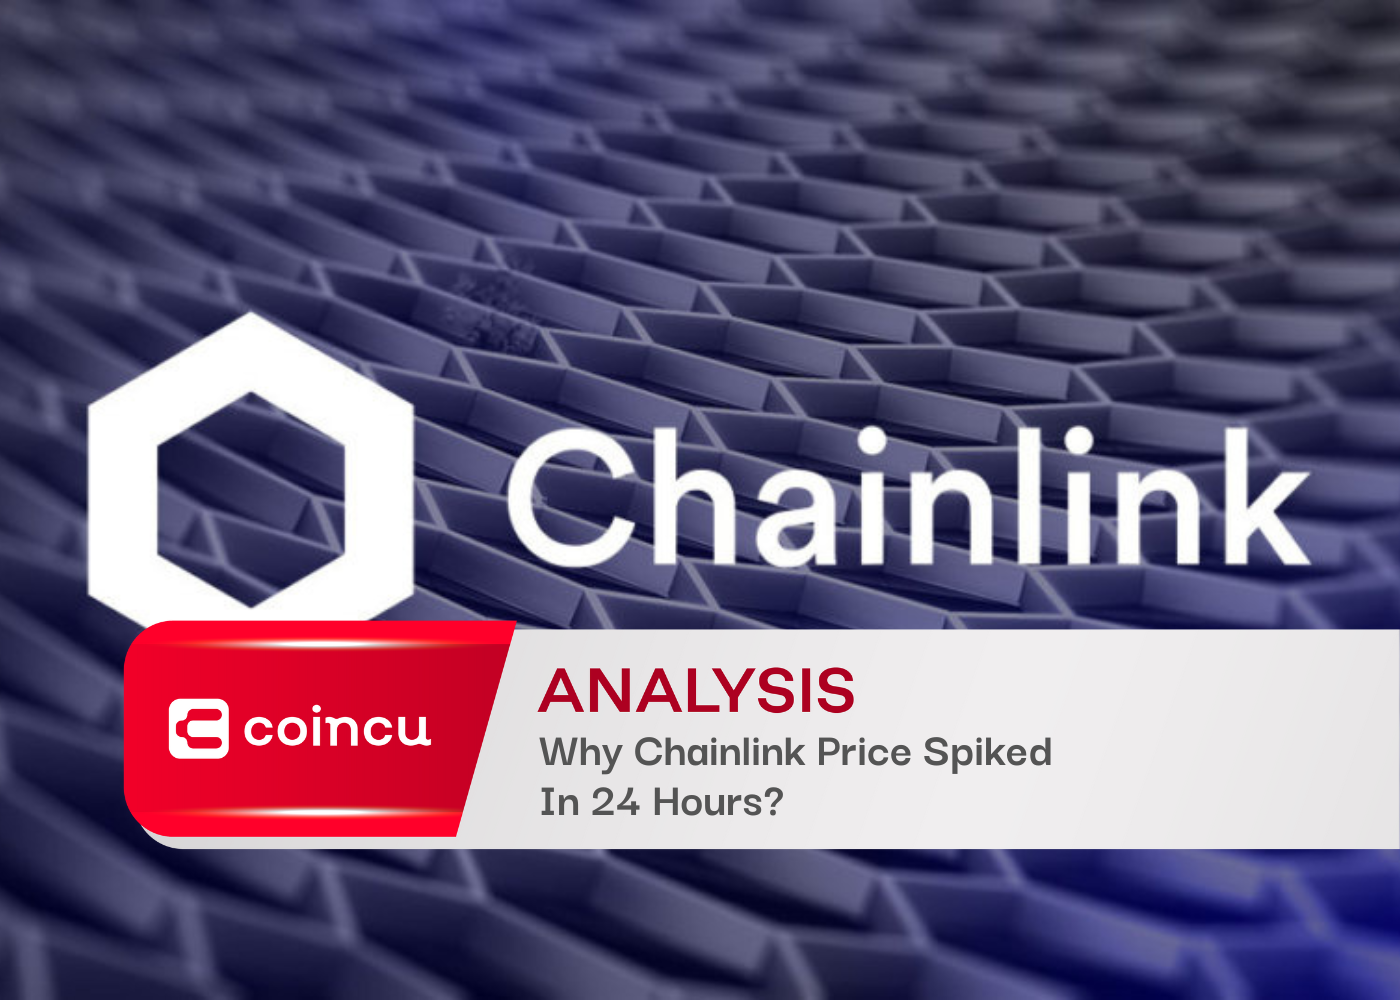 Why Chainlink Price Spiked